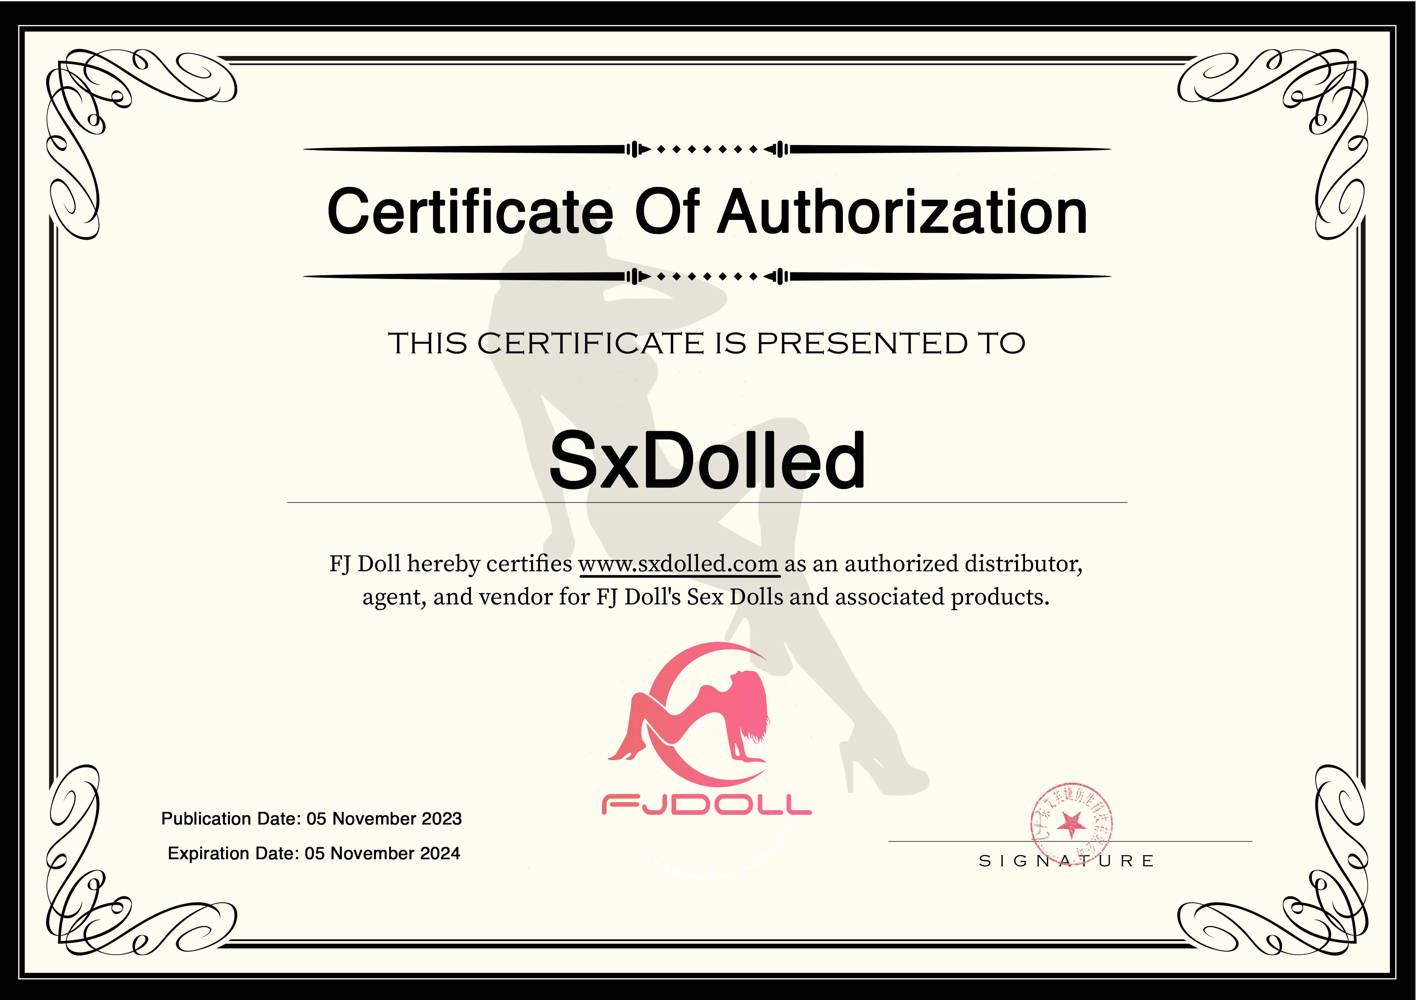 FJ Doll Certificate of Authorisation with SxDolled.com